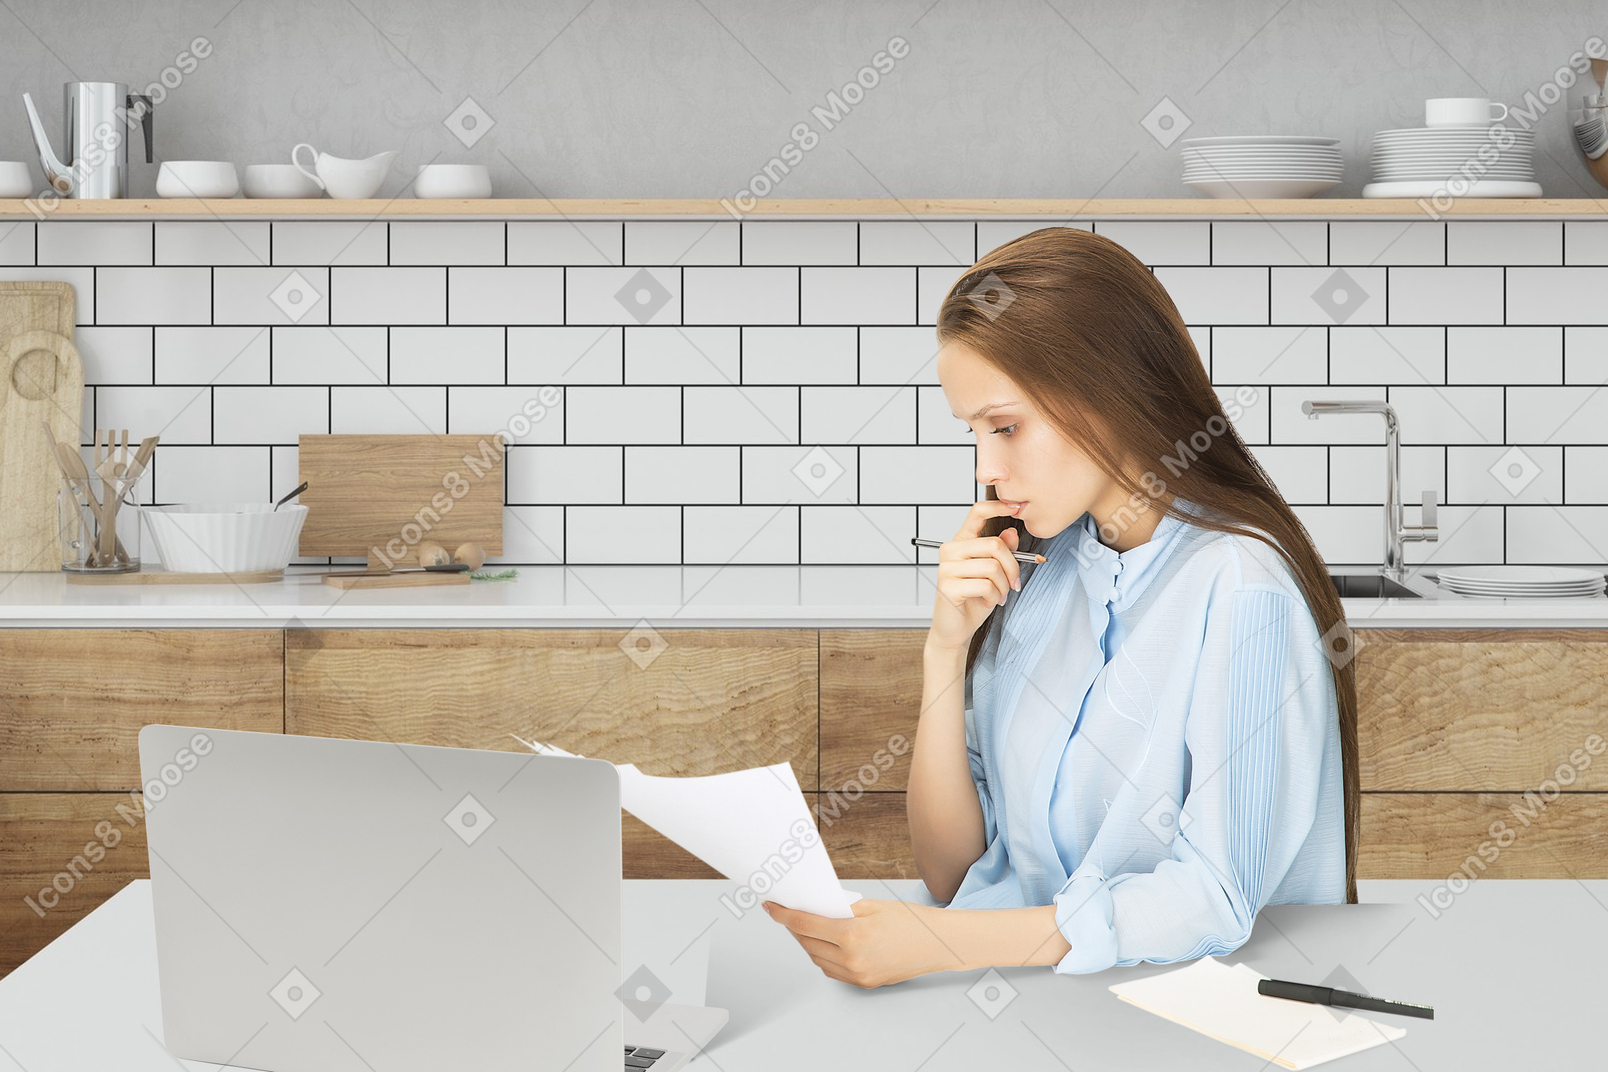 Pensive woman working with documents